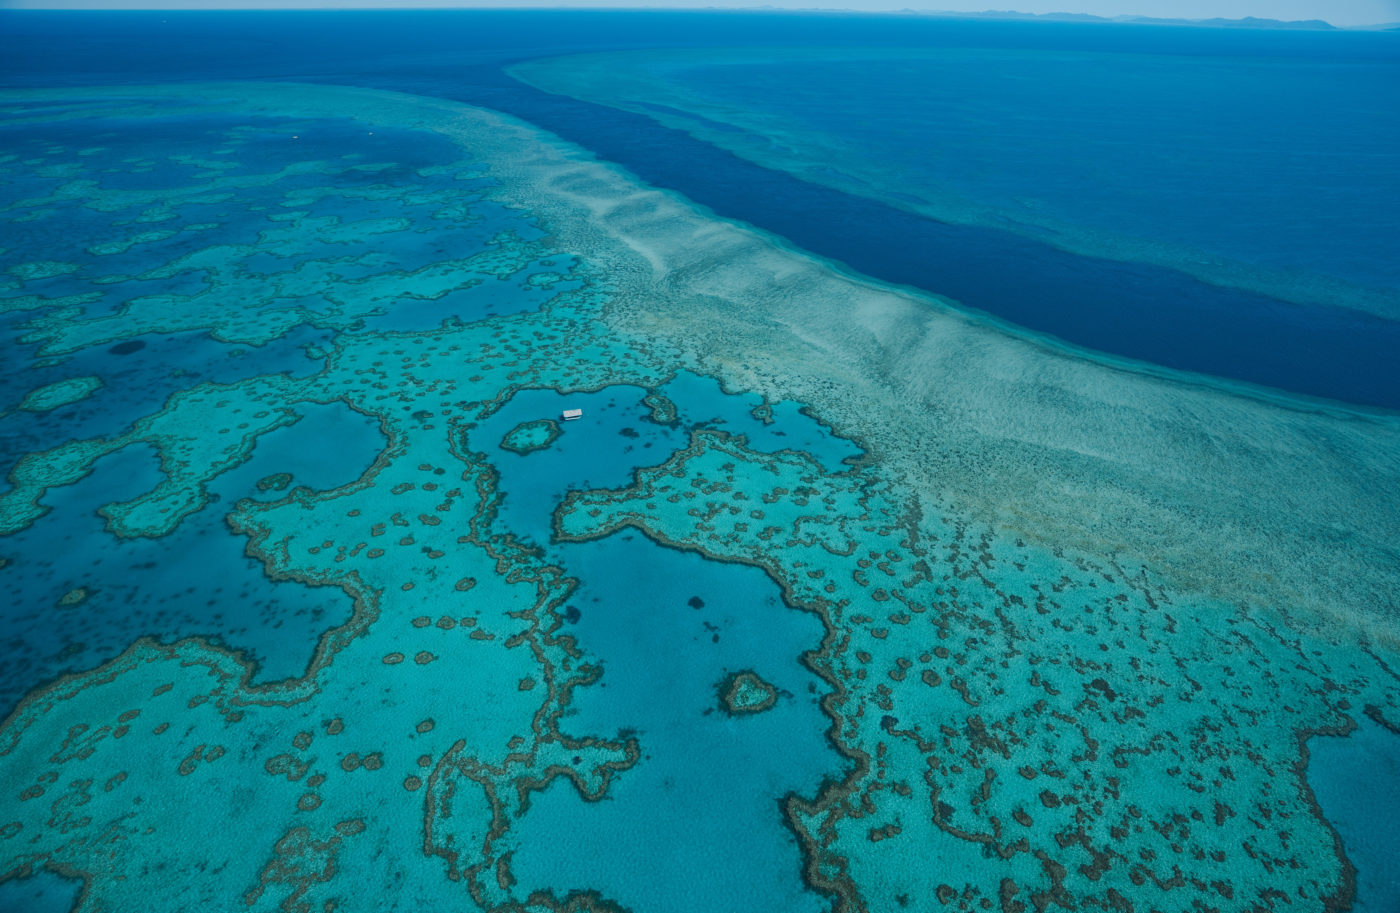 Views from helicopter, Great Barrier Reef